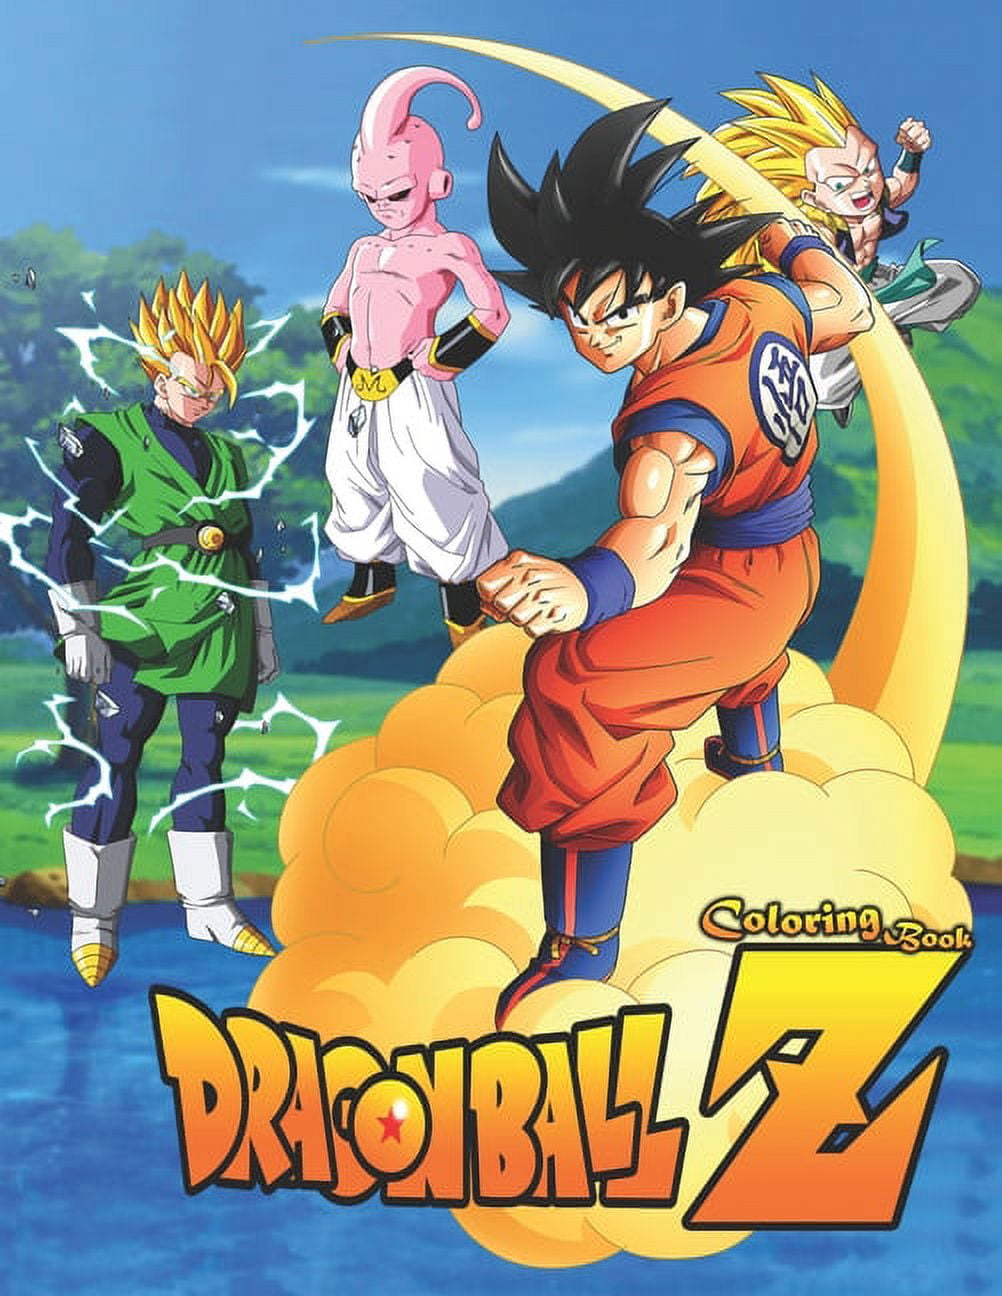 Dragon Ball Z Coloring Book: 50 Pages Of Fun Coloring For Kids And adults,  High Quality Coloring Pages for Kids and Adults, Color All Your Favorite  Characters, Great Gift for Dragon Ball